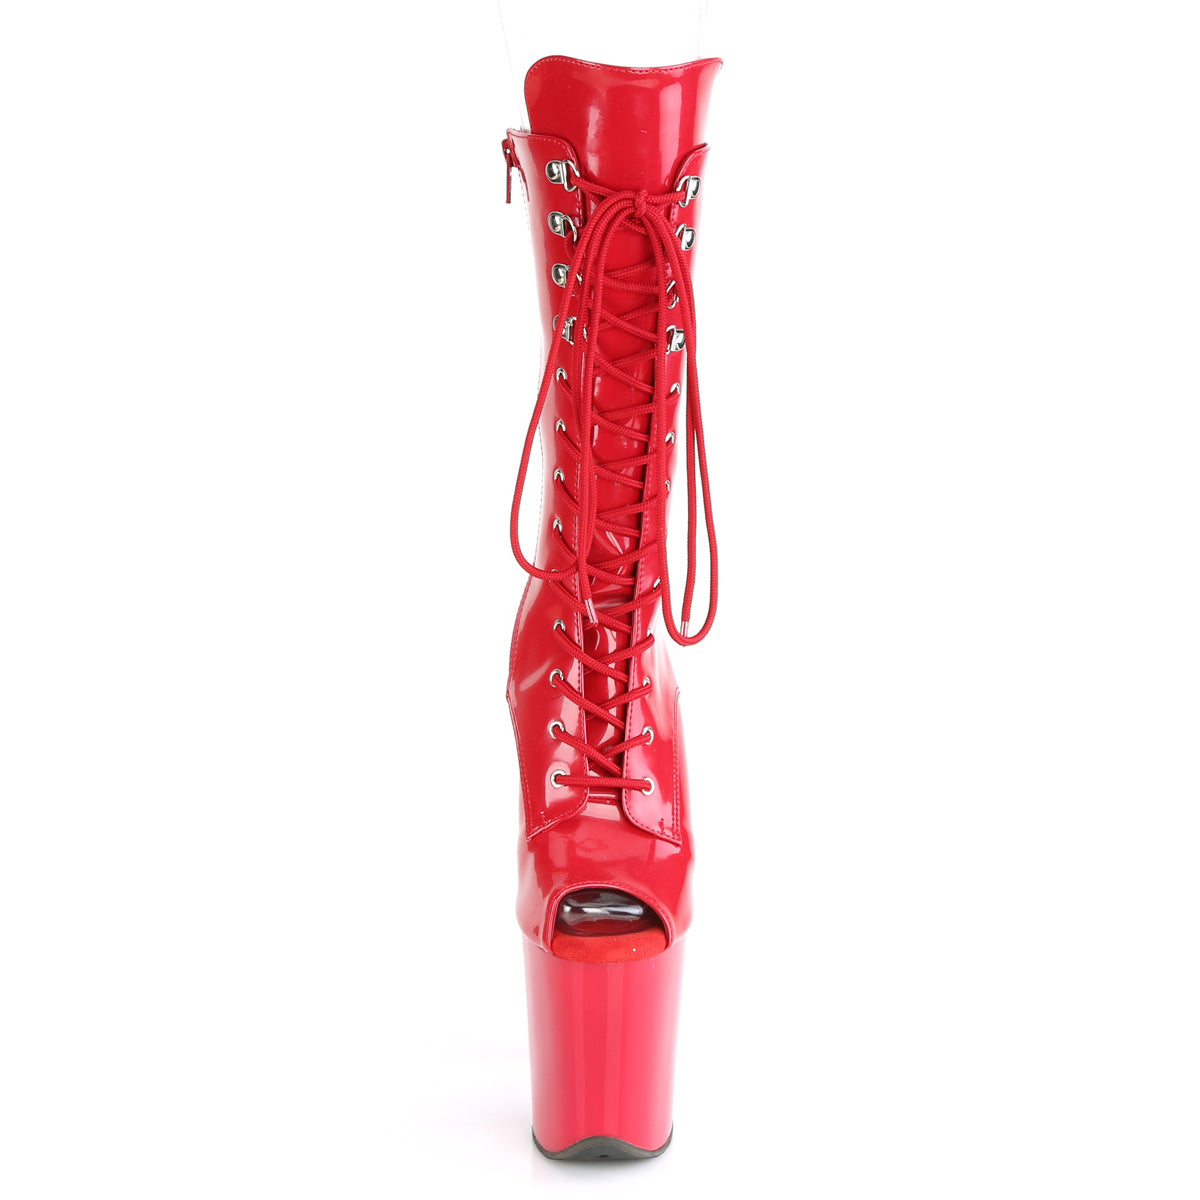 FLAMINGO-1051 / R / M 8 "PLEASER FAST DELIVERY 24-48h 